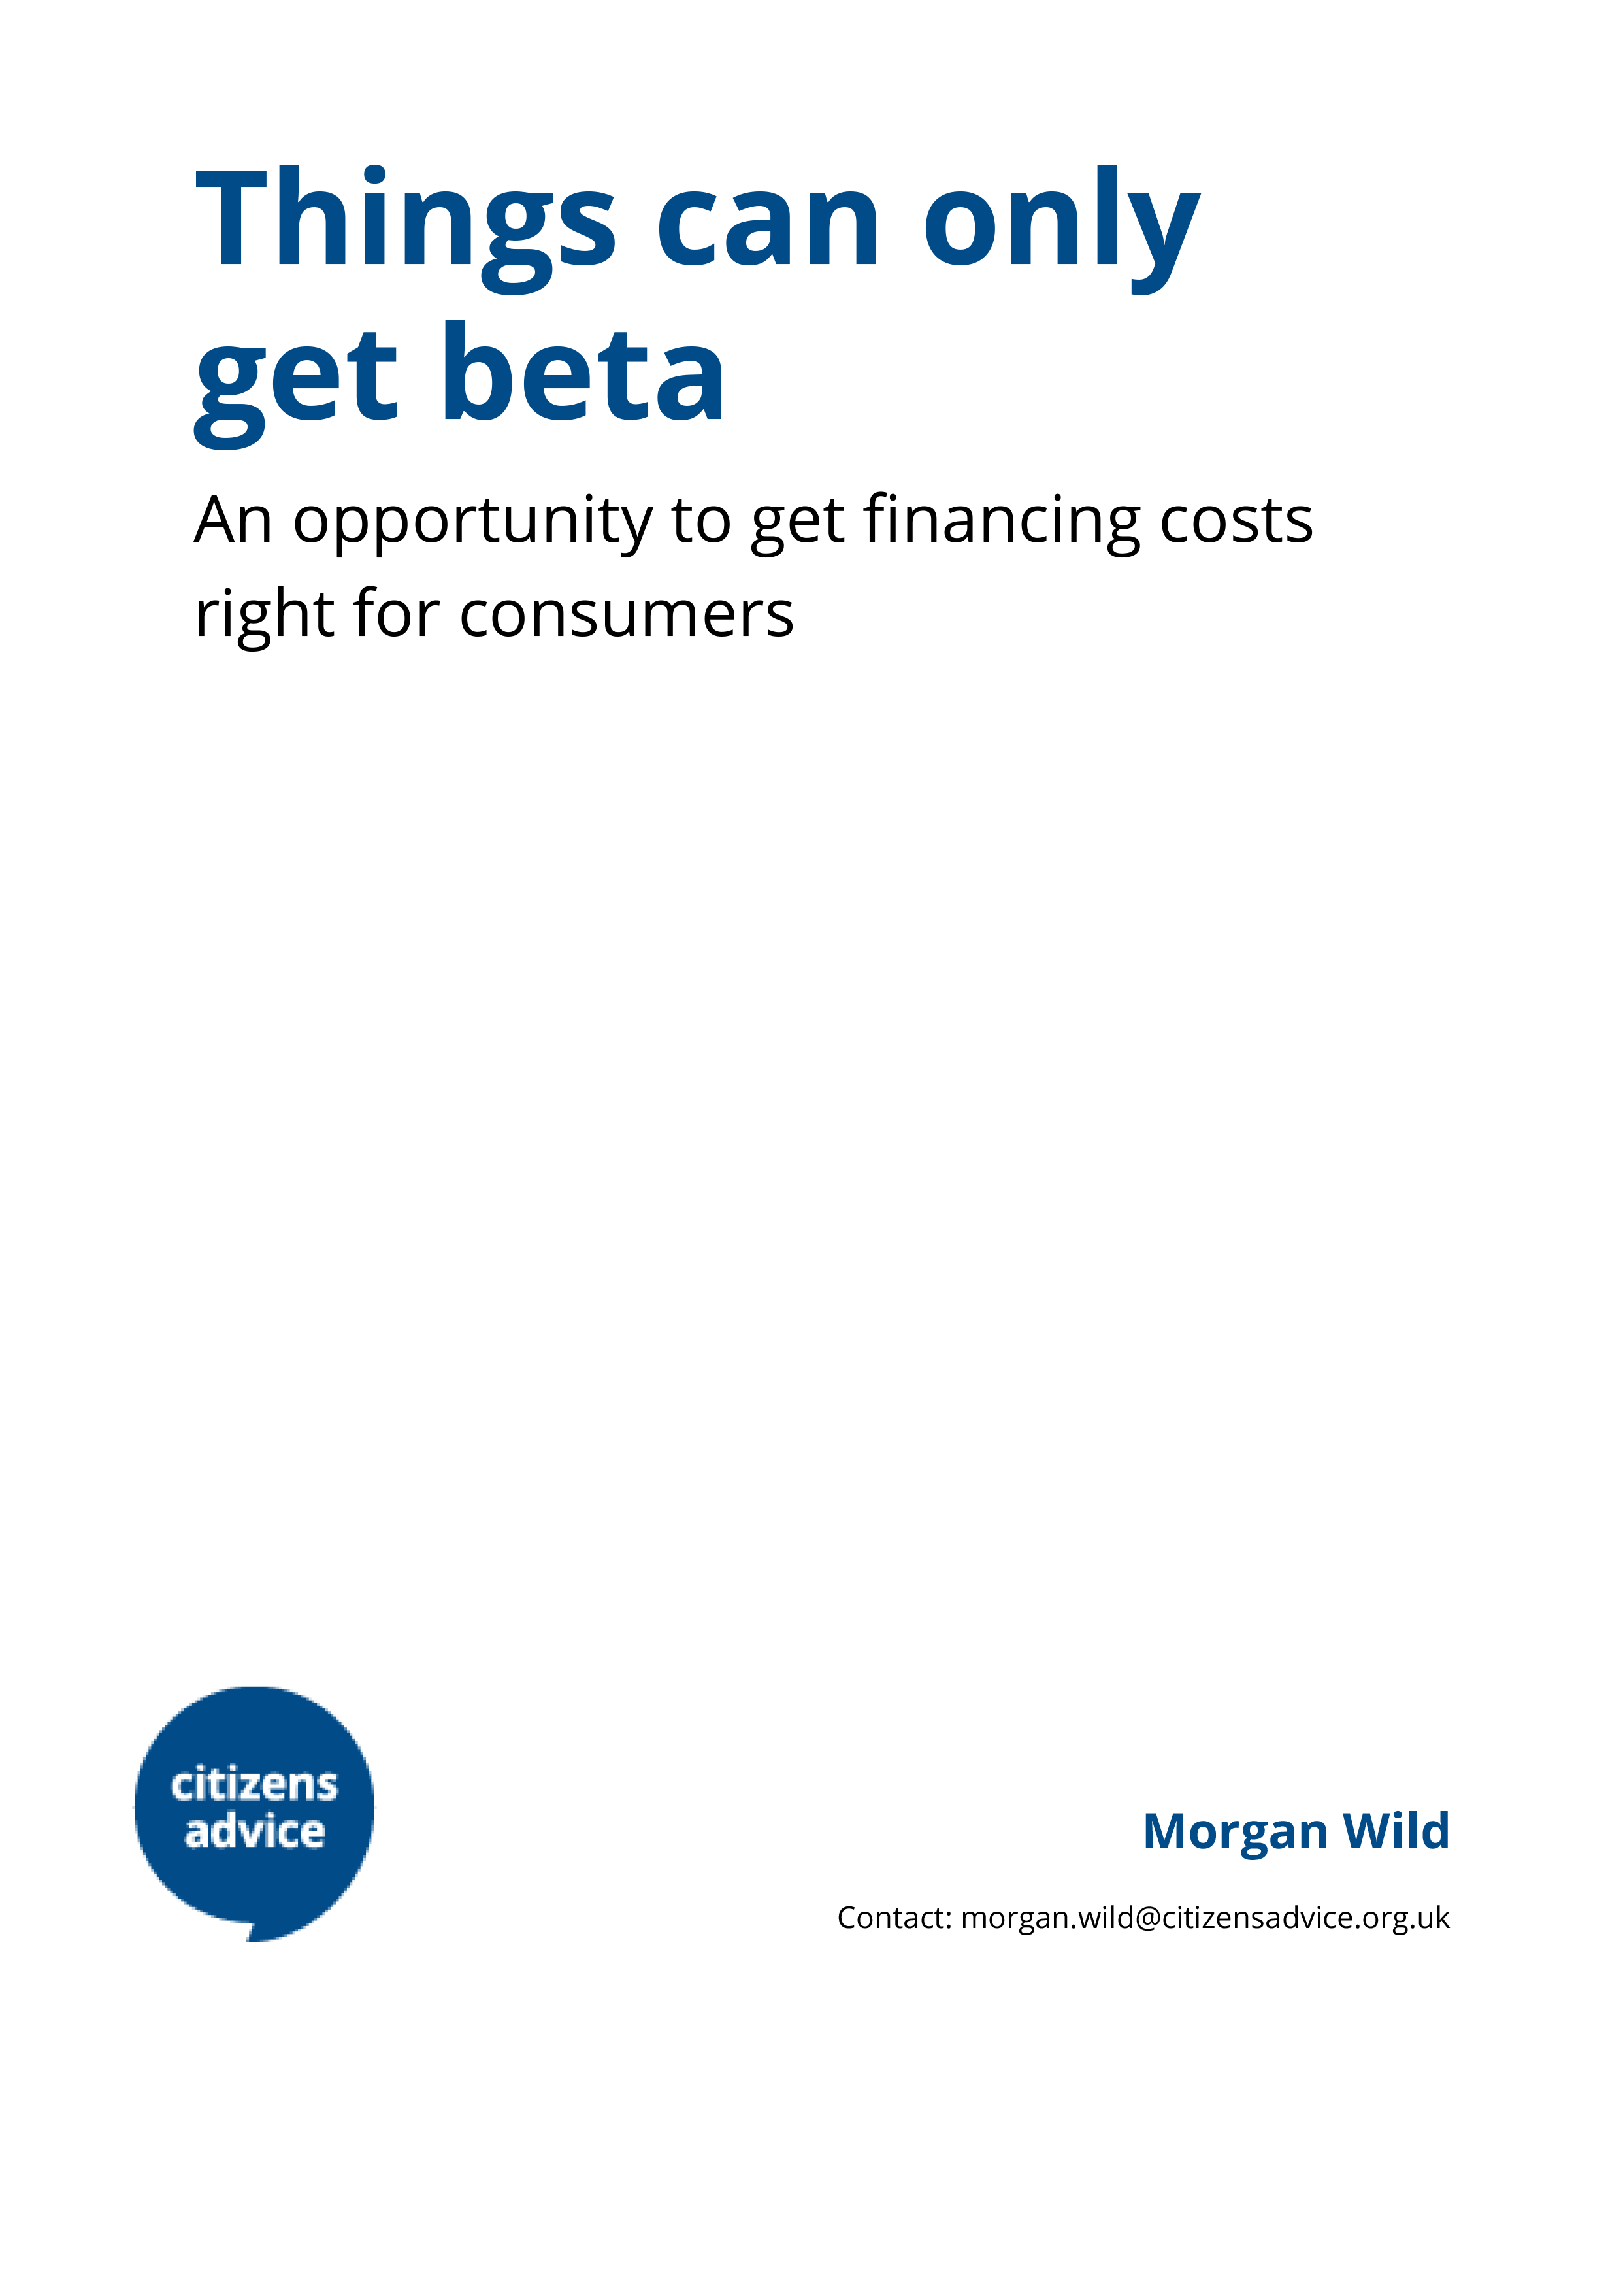 Things can only get beta: An opportunity to get financing costs right for consumers